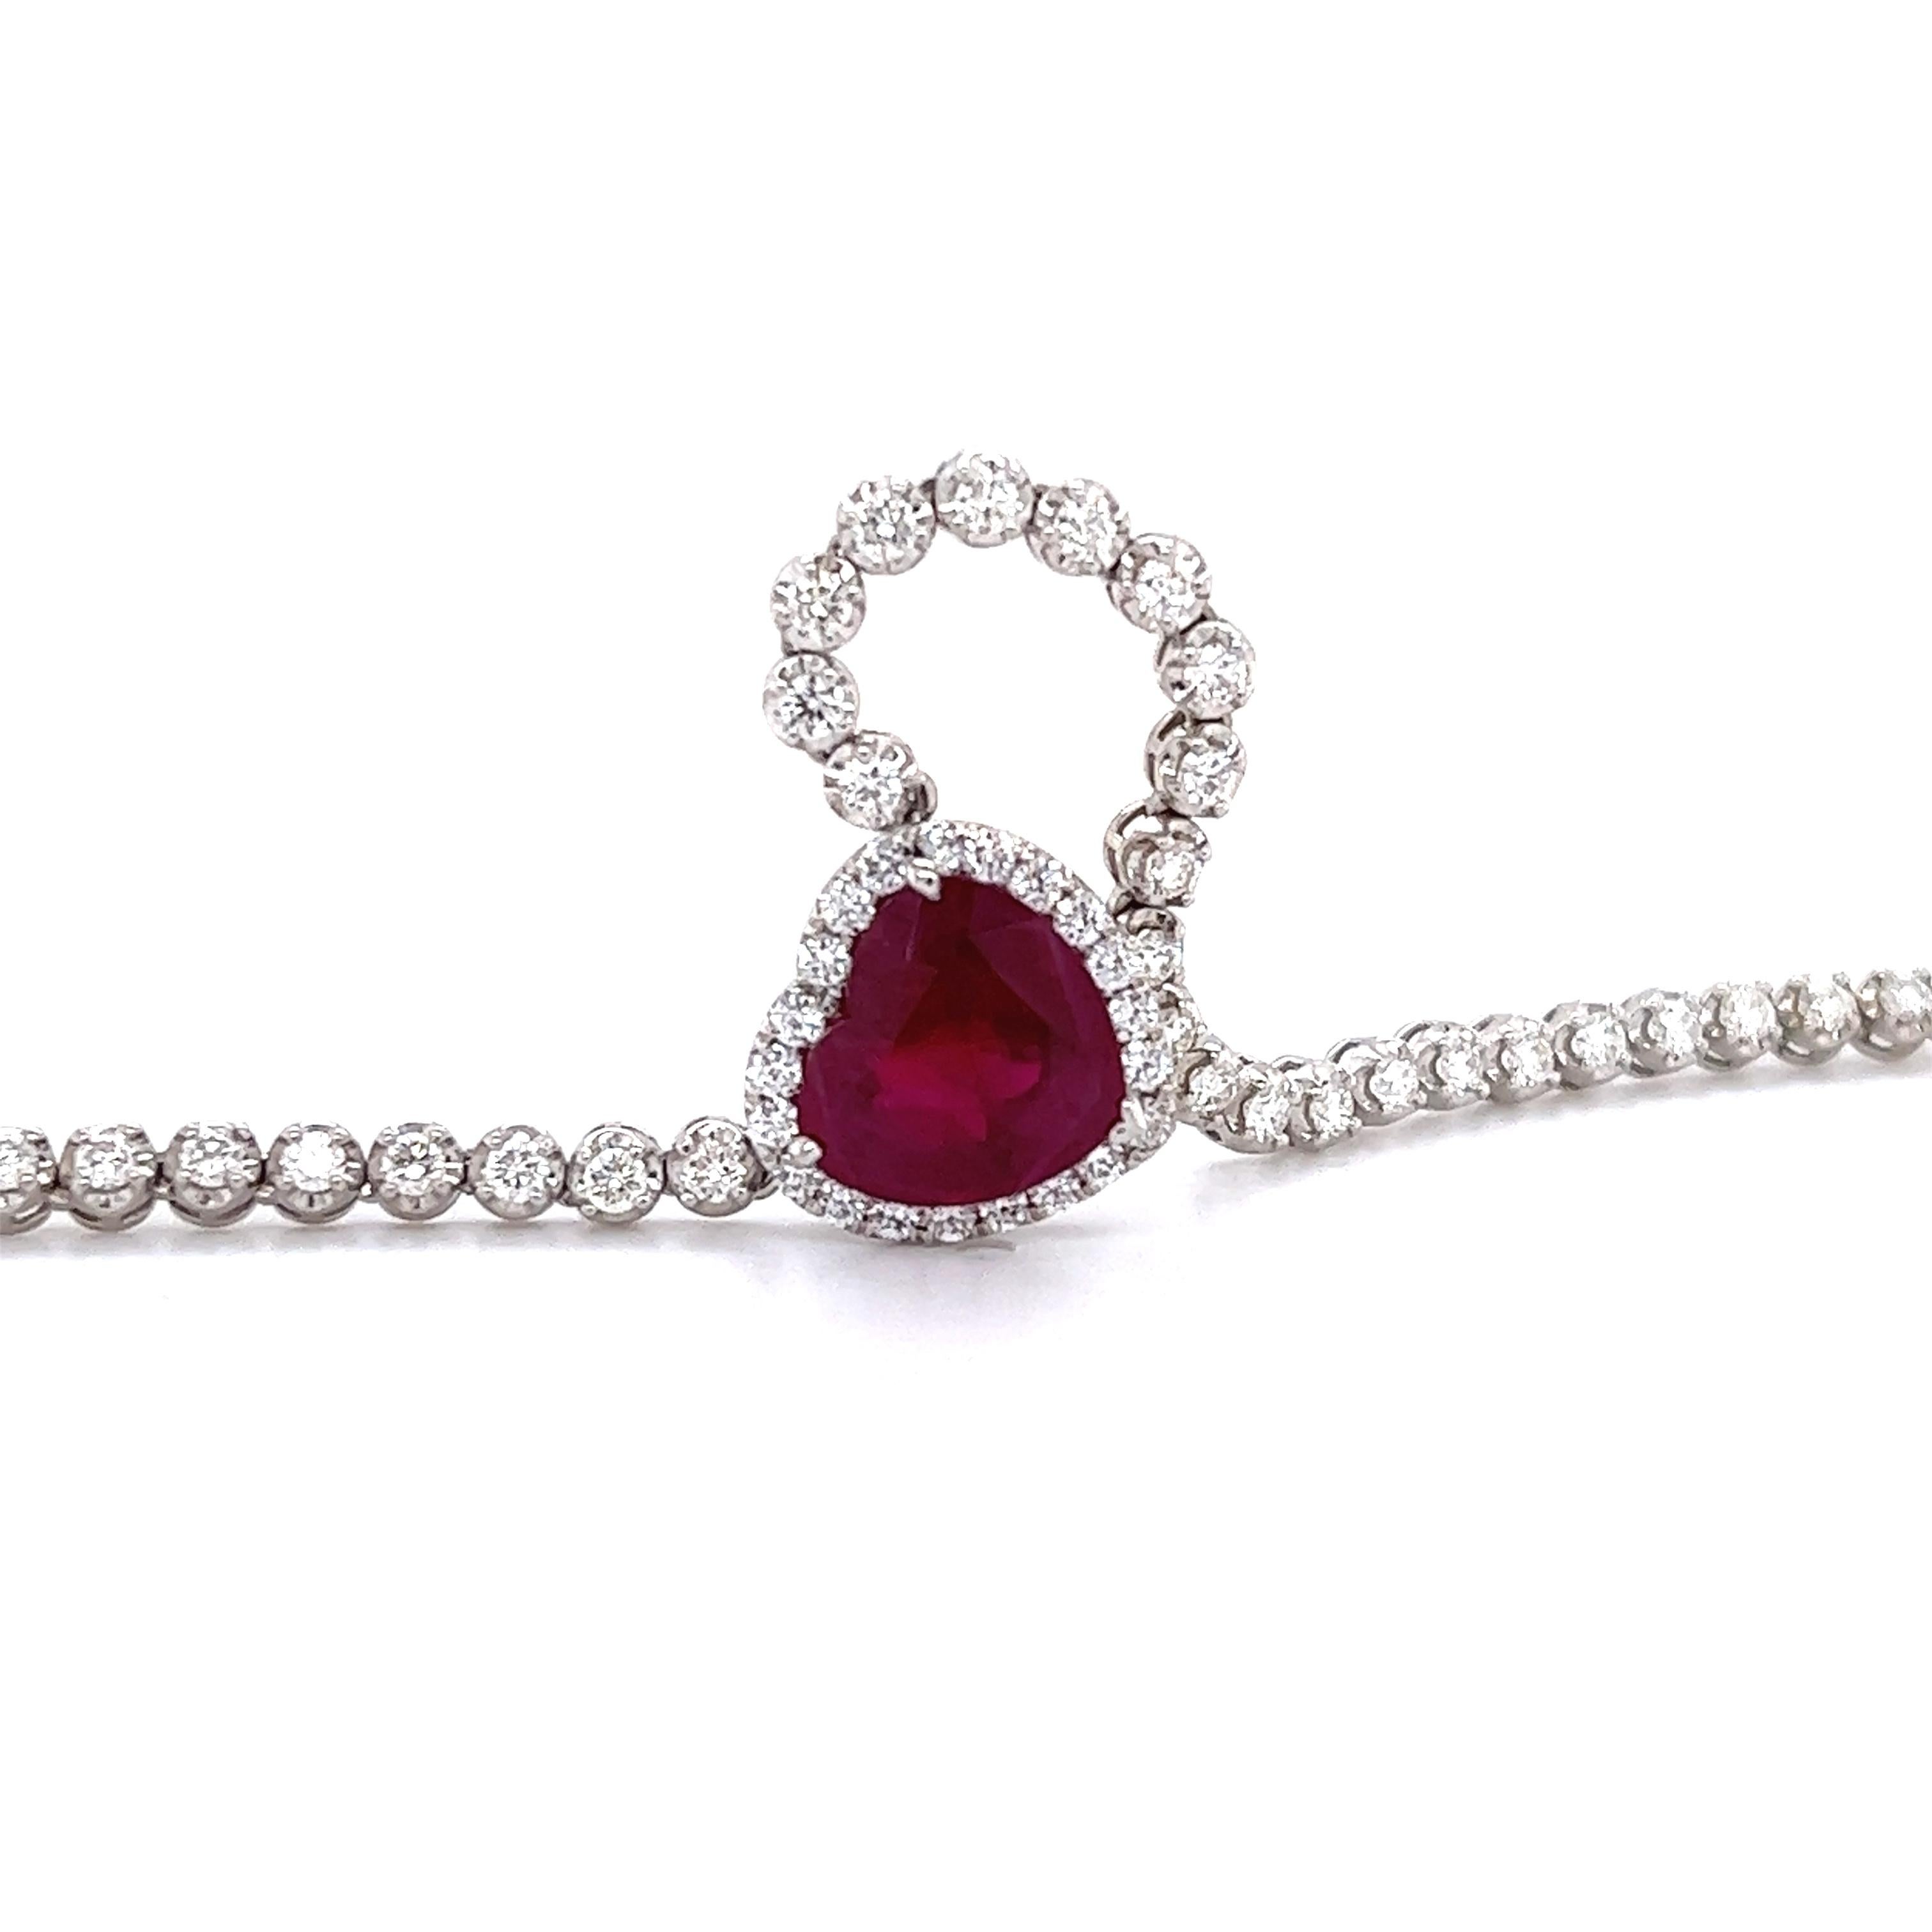 Beautiful designed diamond necklace crafted in 14k white gold. The necklace highlights one 4.76 ct. Burmese ruby in a heart shape. Burma Rubies are the rarest and most valuable member of the corundum family. Colors range from pink red ruby to a